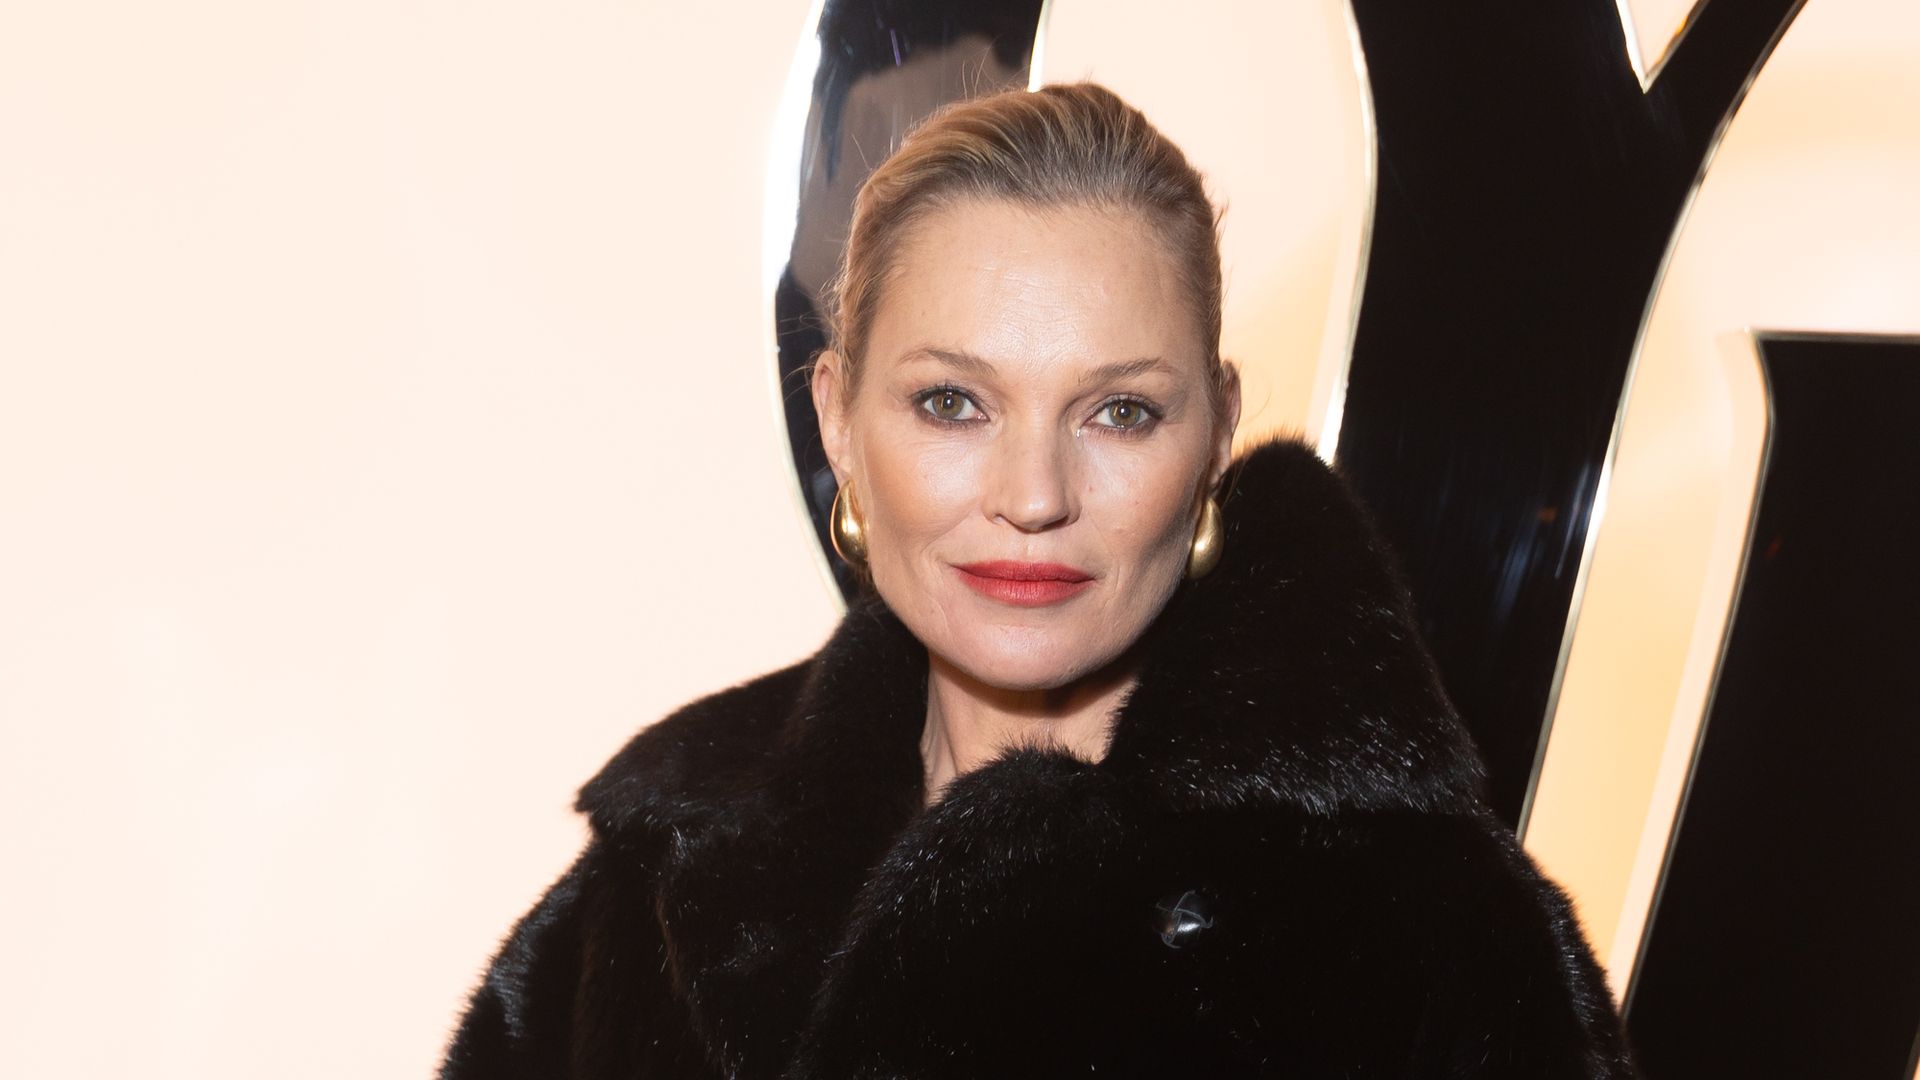 Kate Moss stuns in sheer tights and leather shorts at Paris Fashion Week